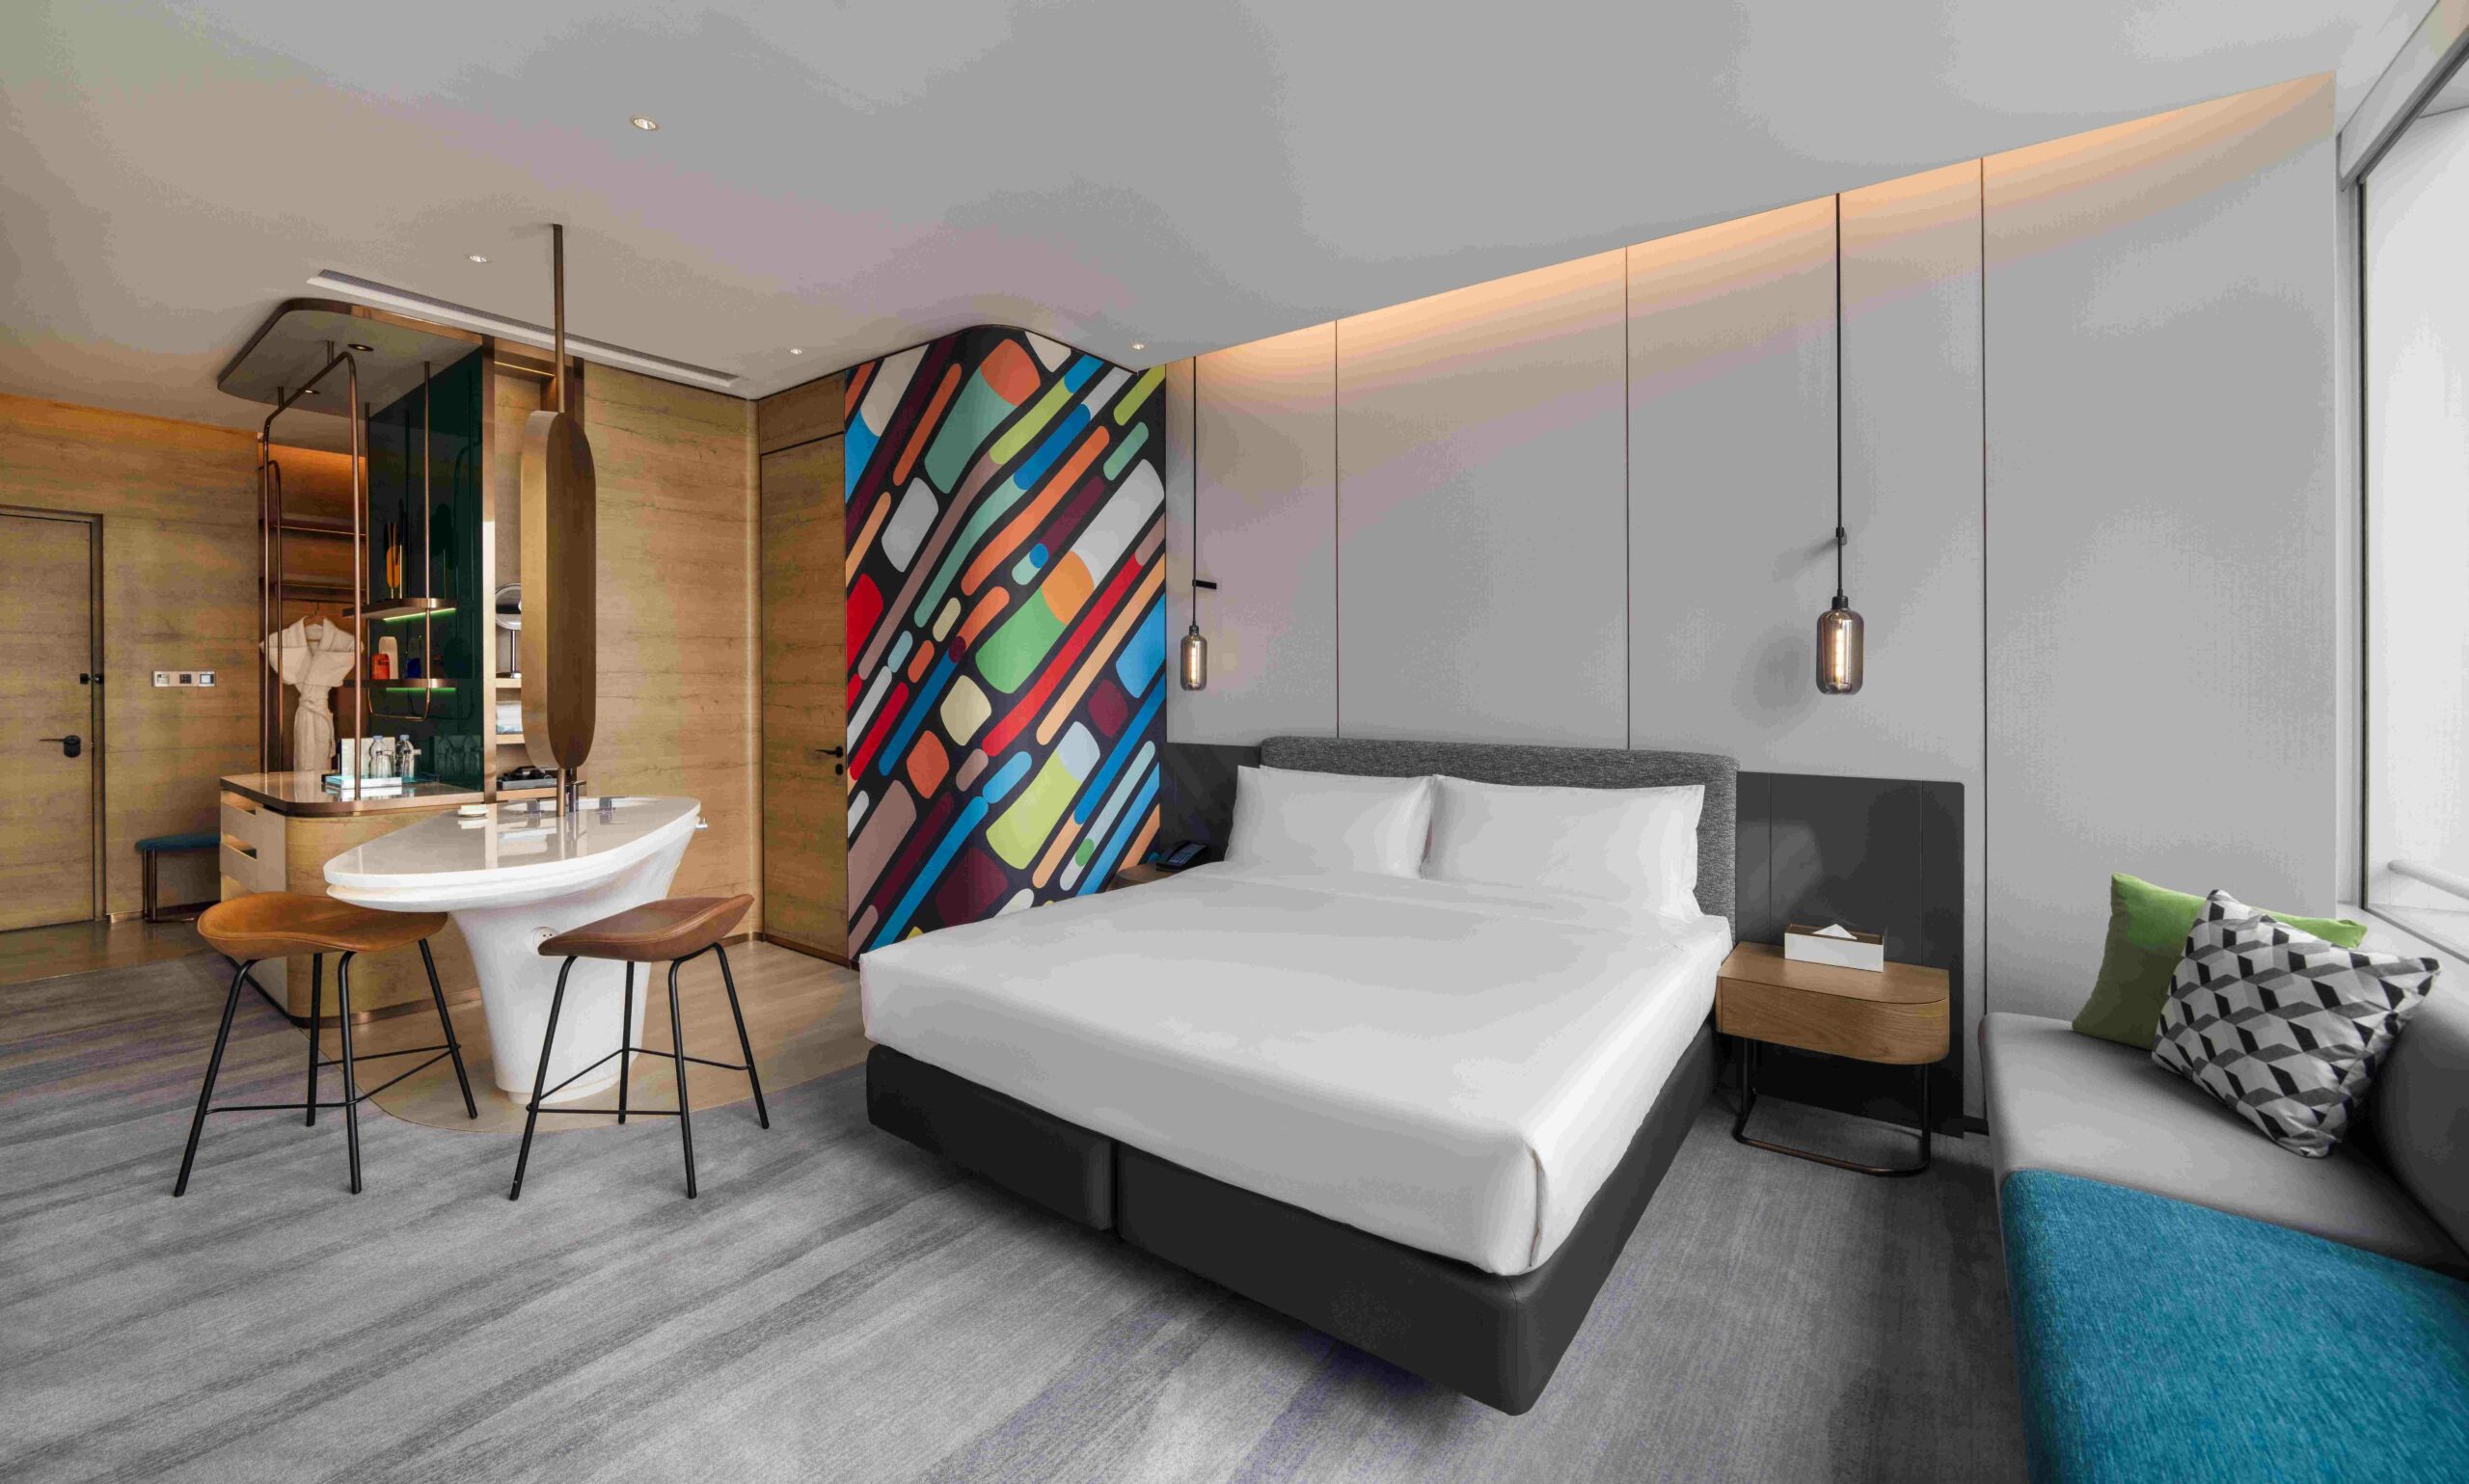 The inaugural hotel of Maqo, Wharf Hotels’ latest premium lifestyle brand, has opened as the group's second property in Changsha.